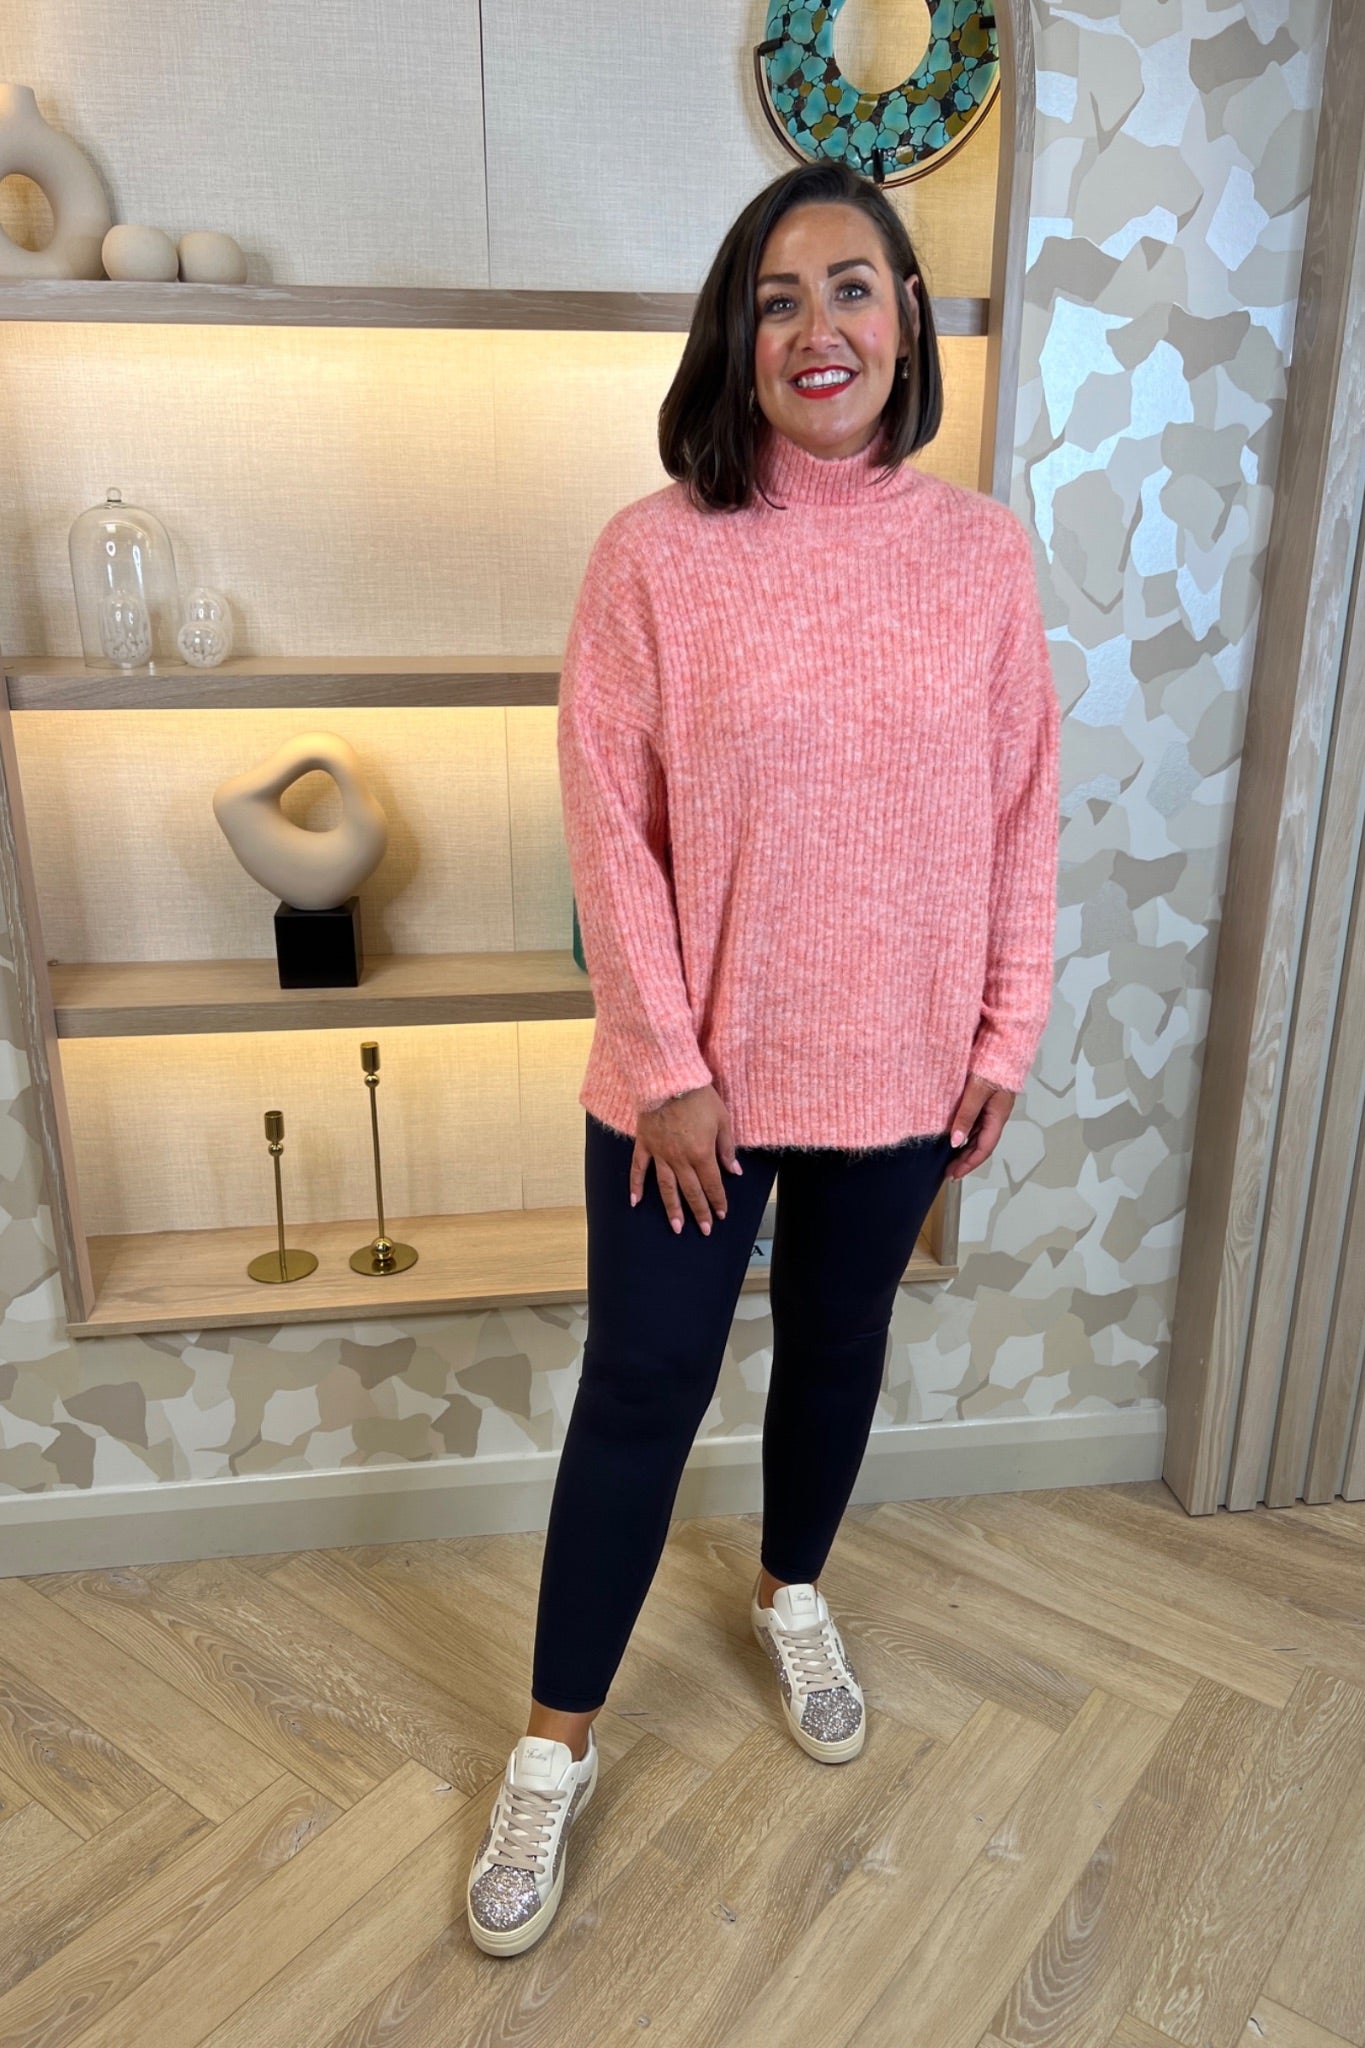 Sarah High Neck Ribbed Jumper In Pink - The Walk in Wardrobe